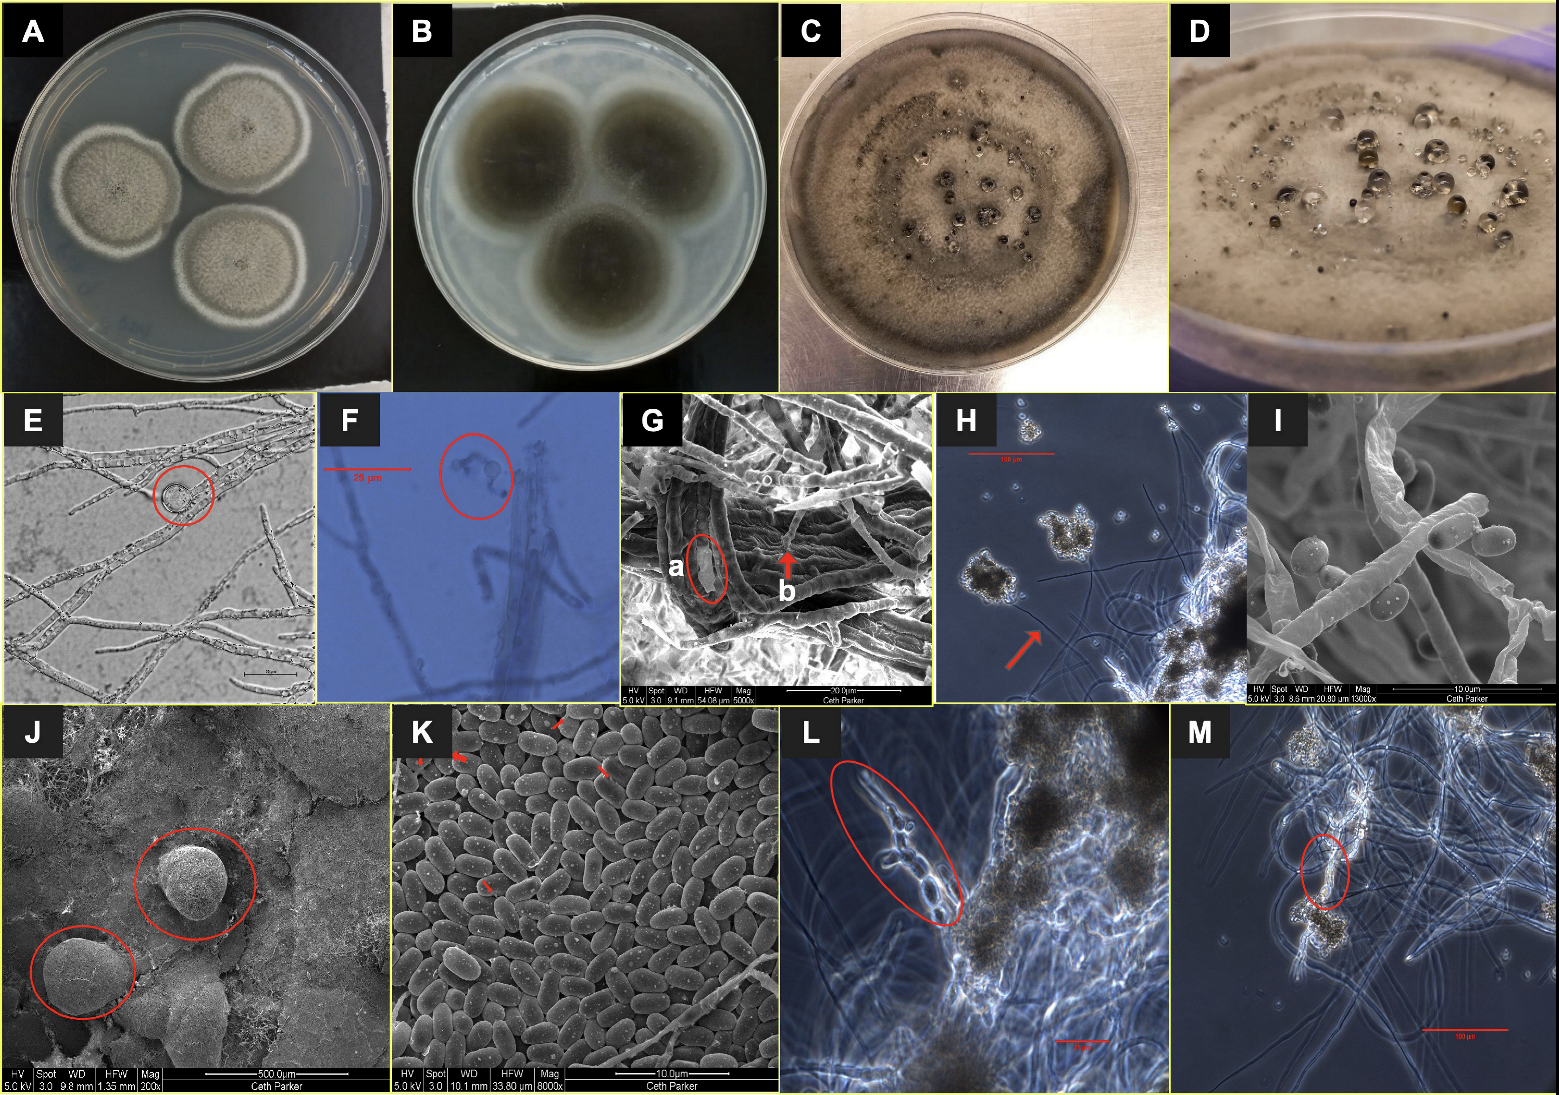 Description and Genome Characterization of Three Novel Fungal Strains Isolated from Mars 2020 Mission-Associated Spacecraft Assembly Facility Surfaces—Recommendations for Two New Genera and One Species